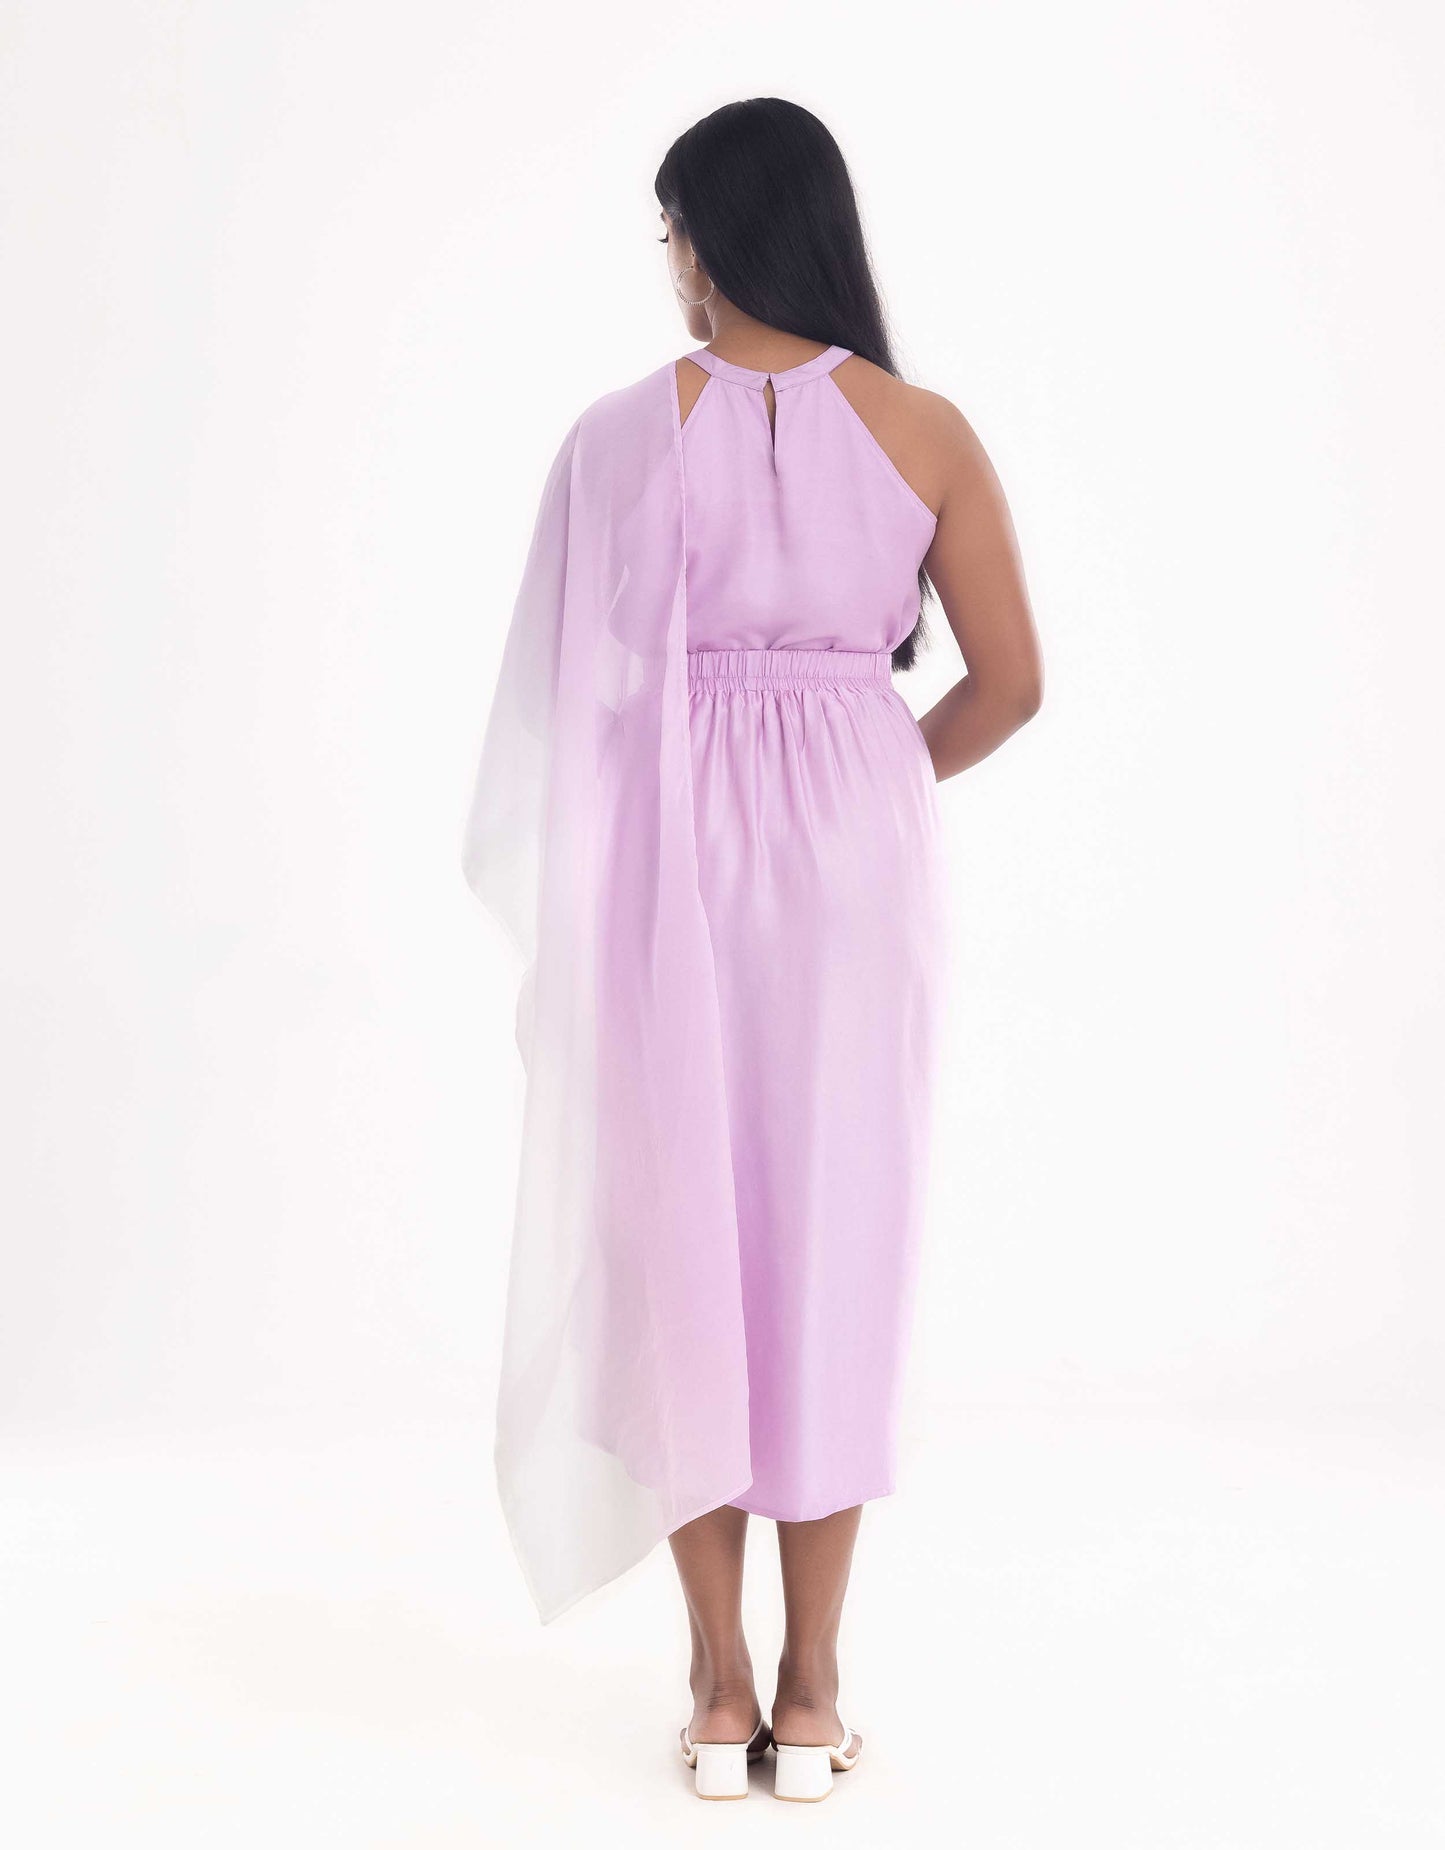 Hueloom lavender Allure convertible capsule with top and skirt back view display.